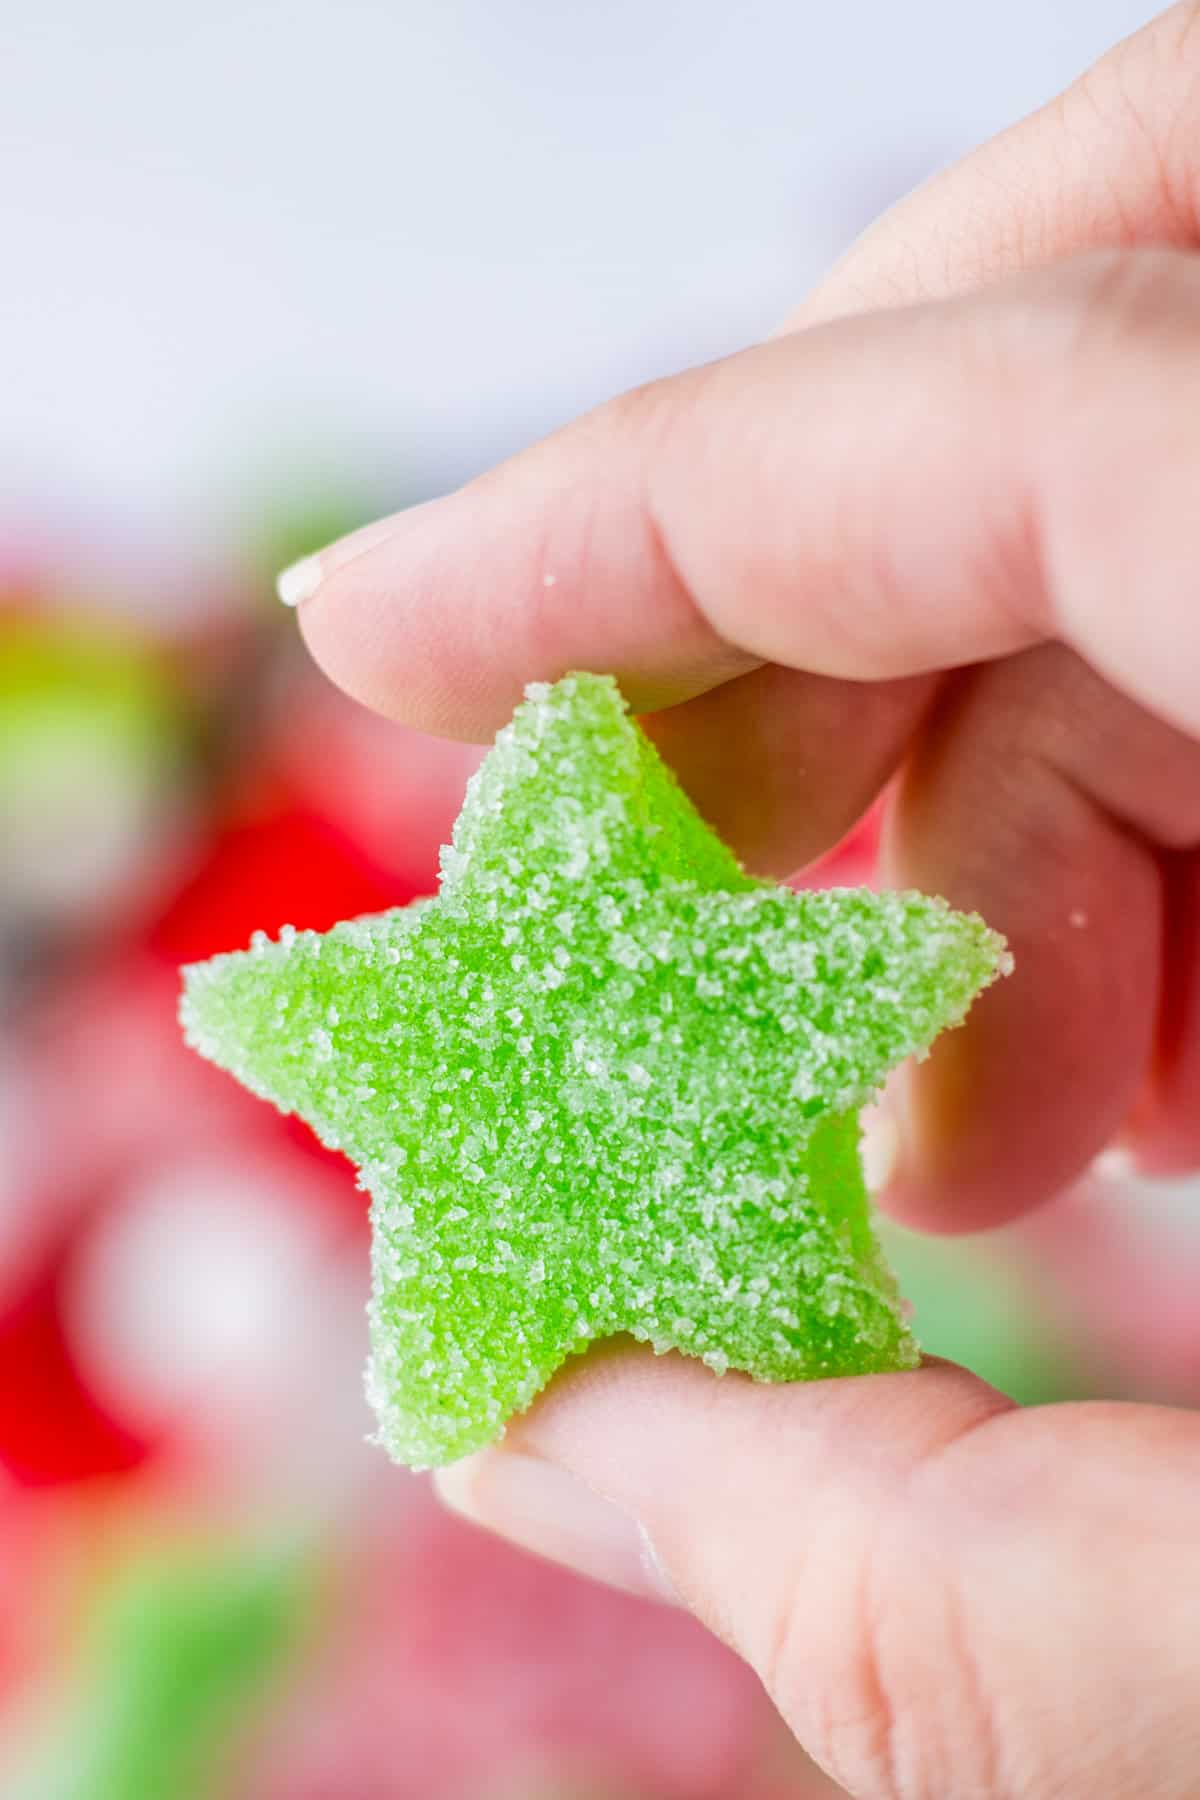 Hand holding a green star shaped gum drop candy.